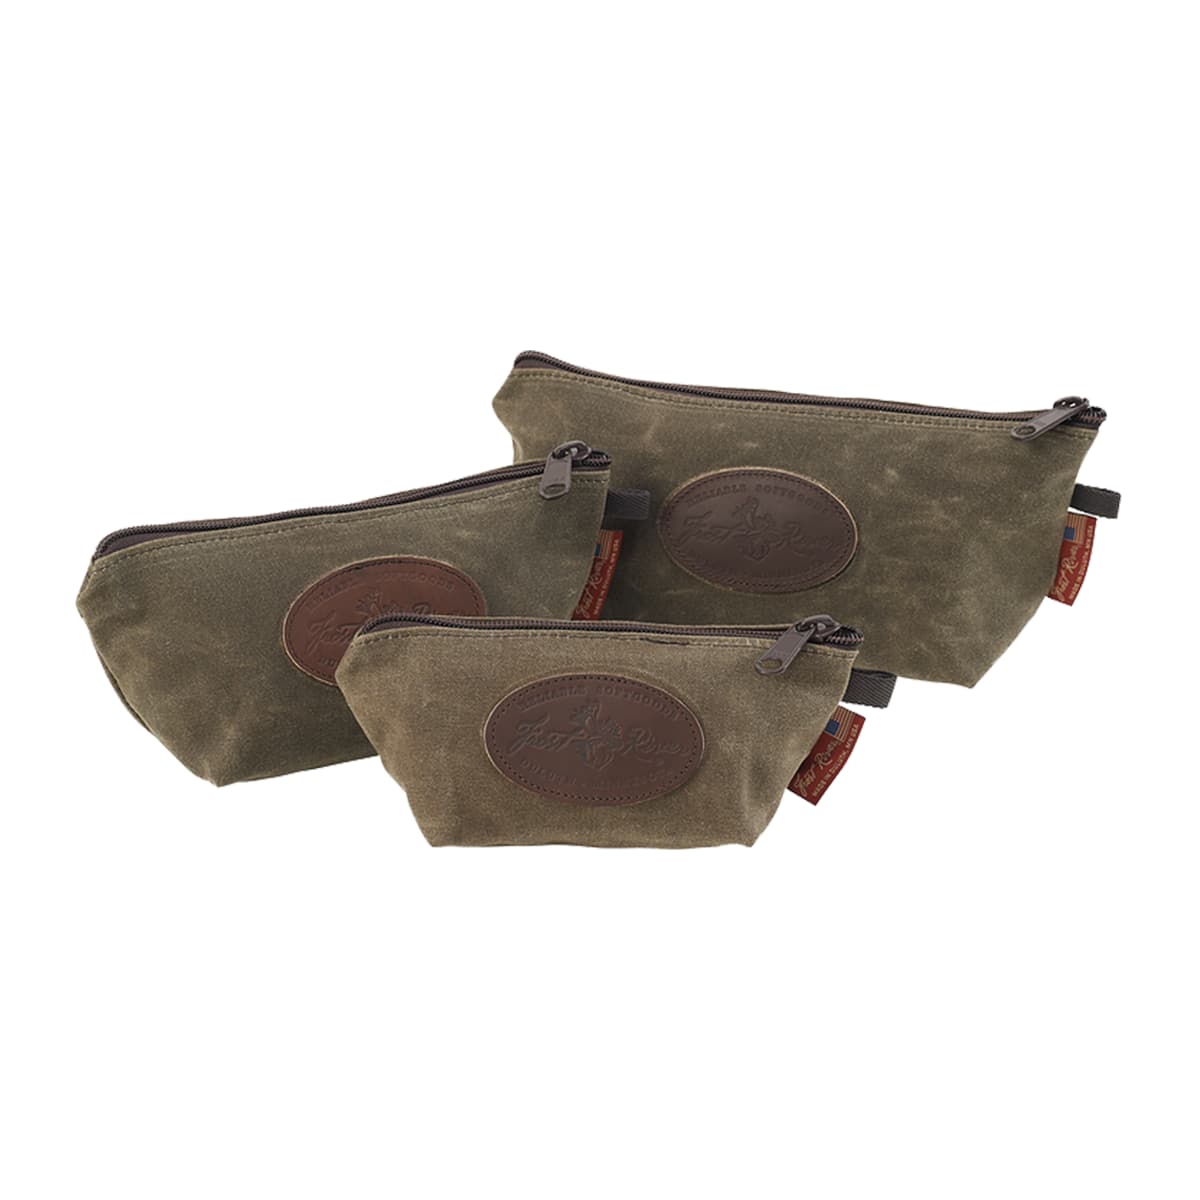 Frost River Accessory Bags